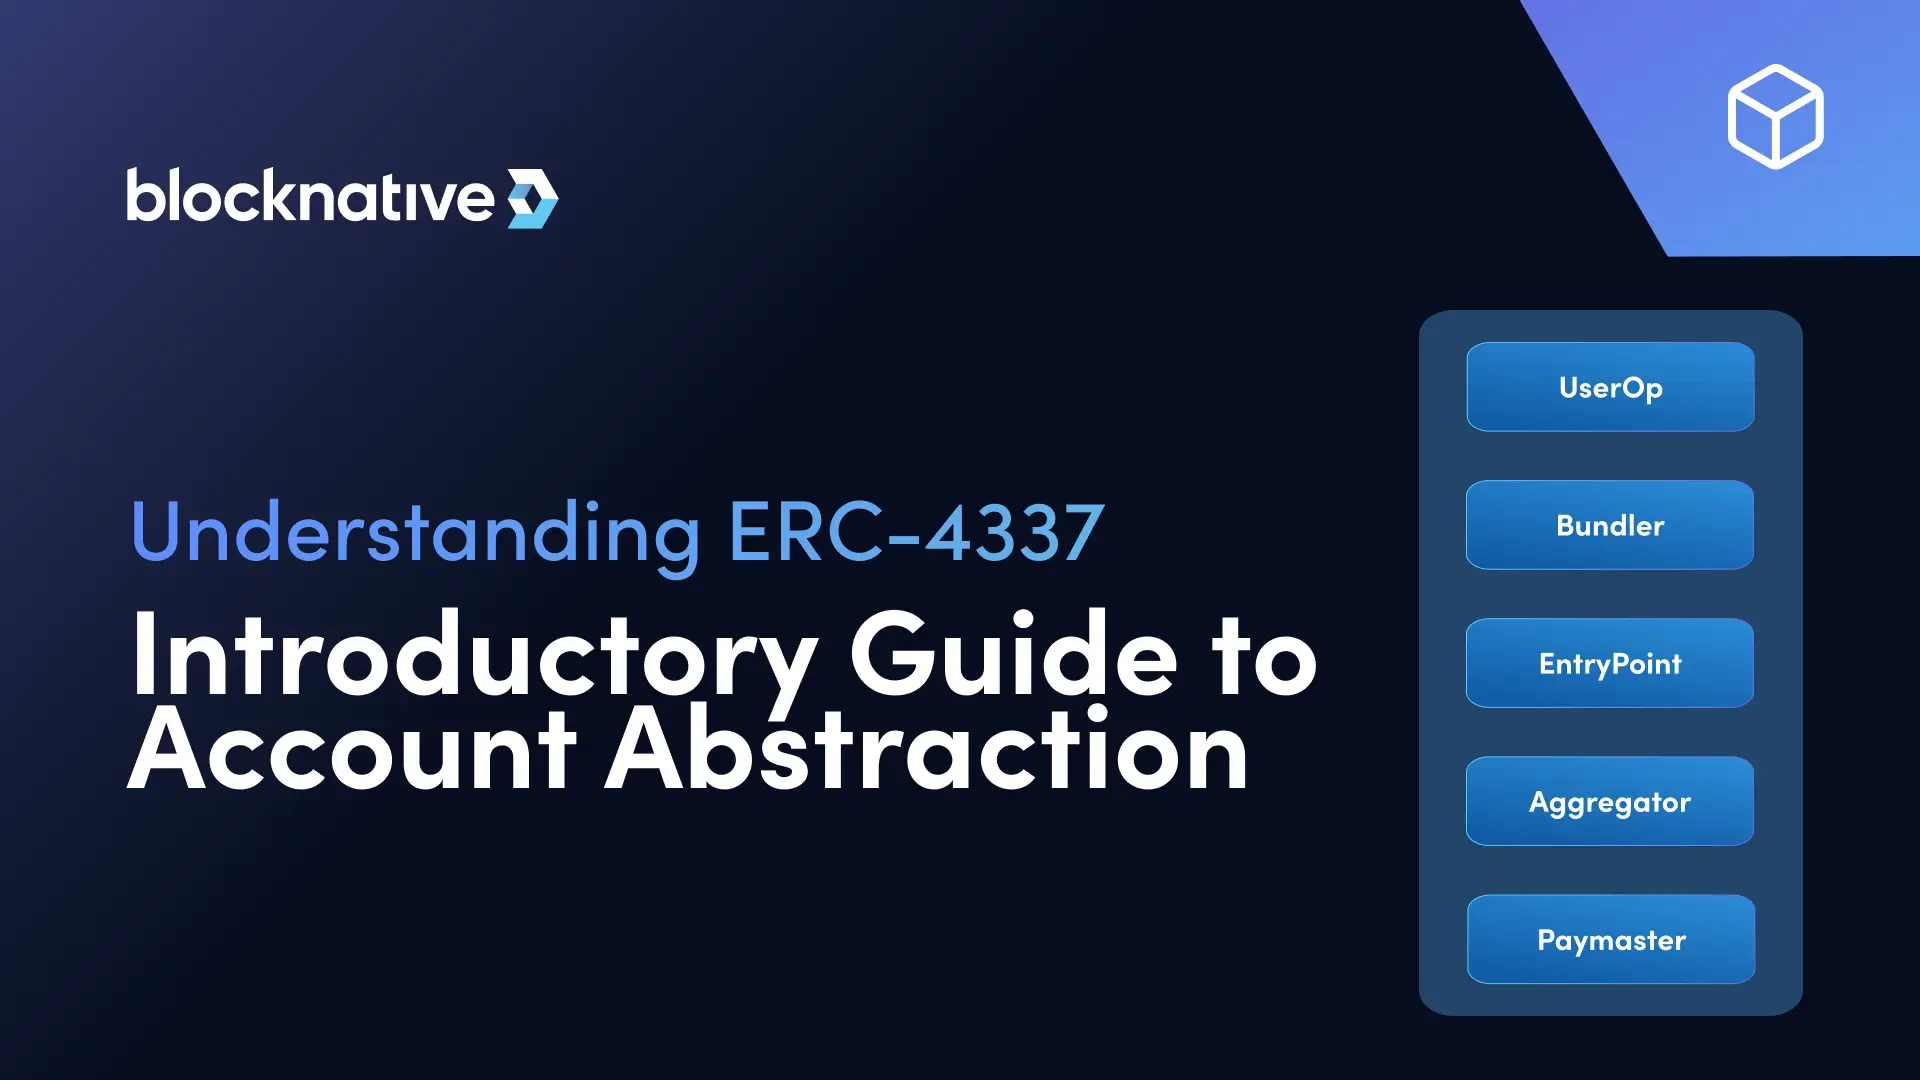 Introductory Guide to Account Abstraction (ERC-4337)